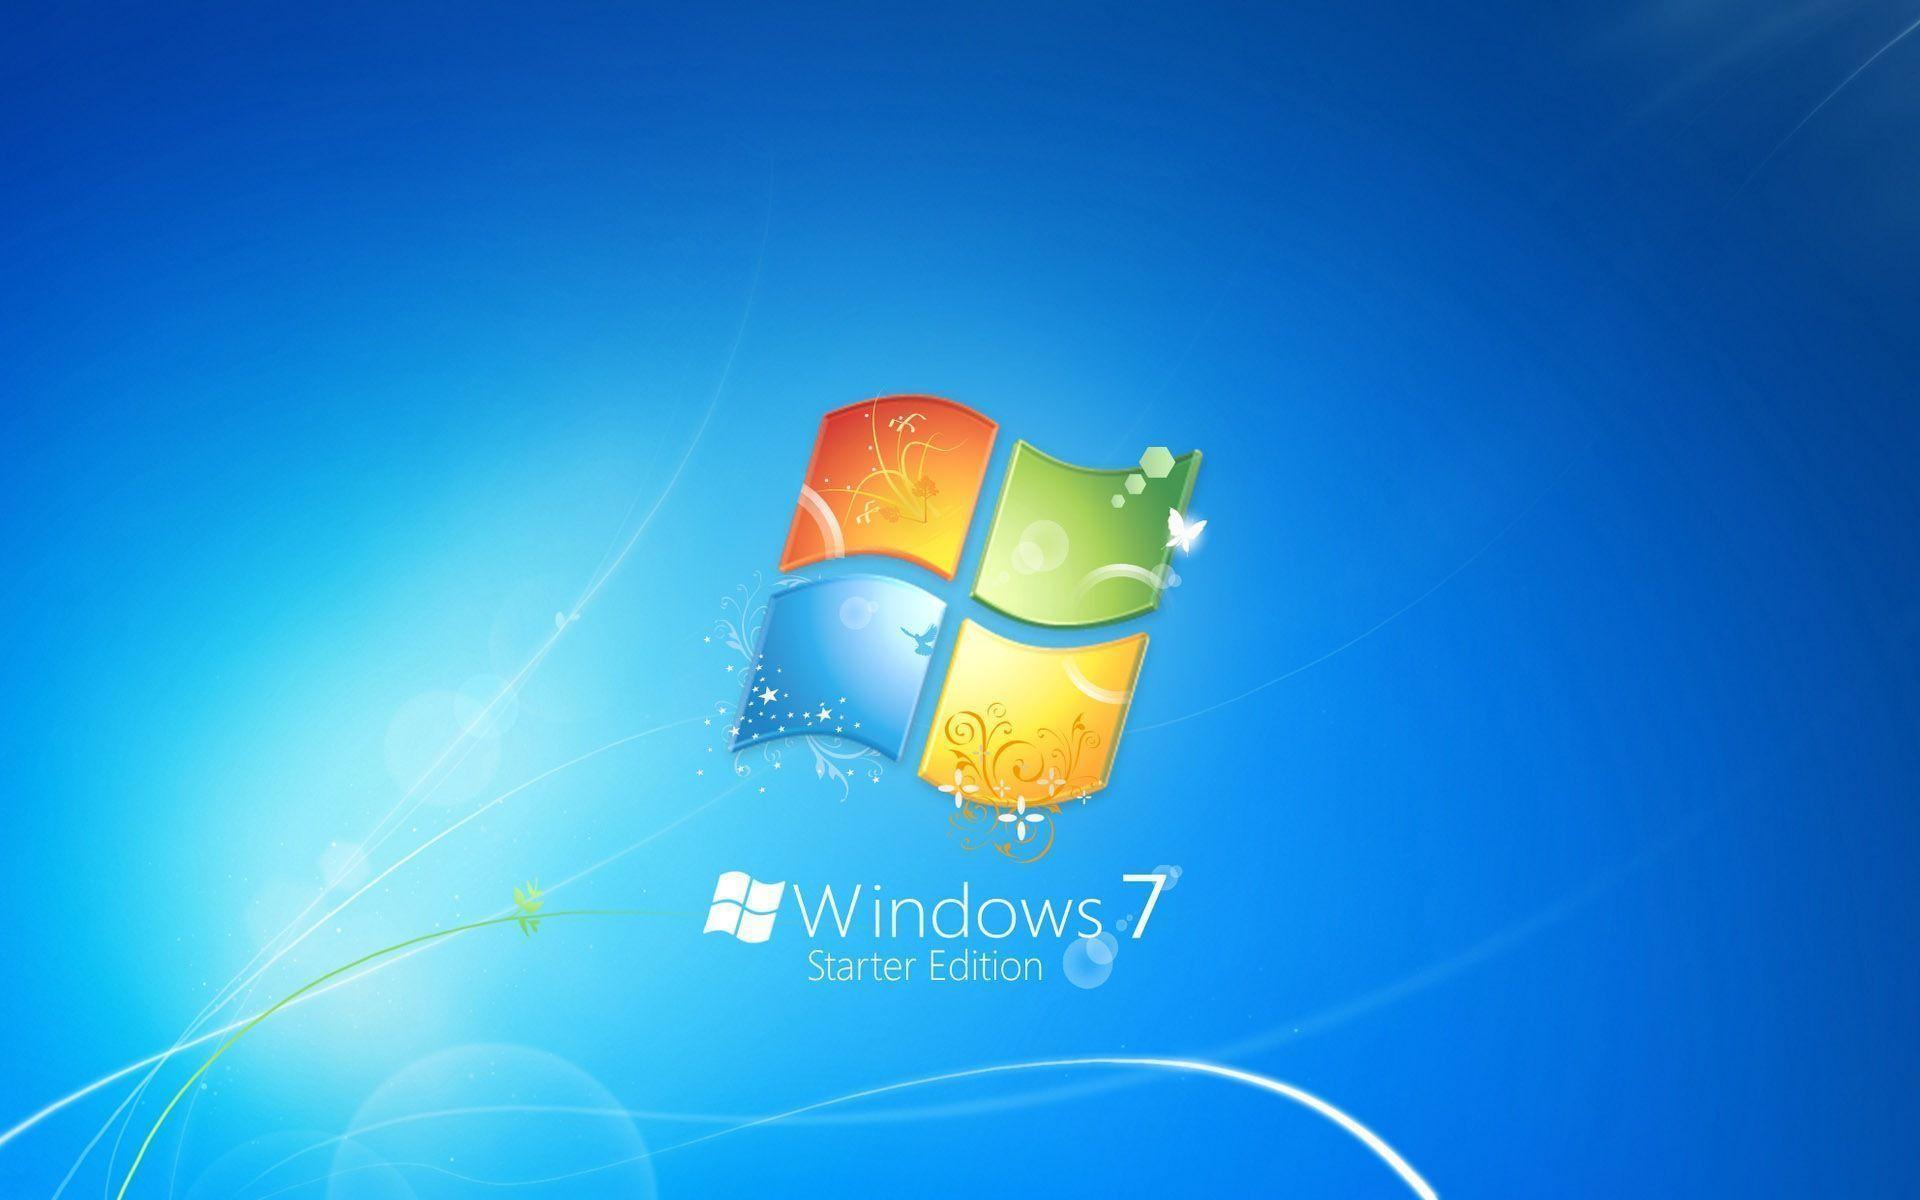 Windows7 theme blue backgrounds logo Wallpapers